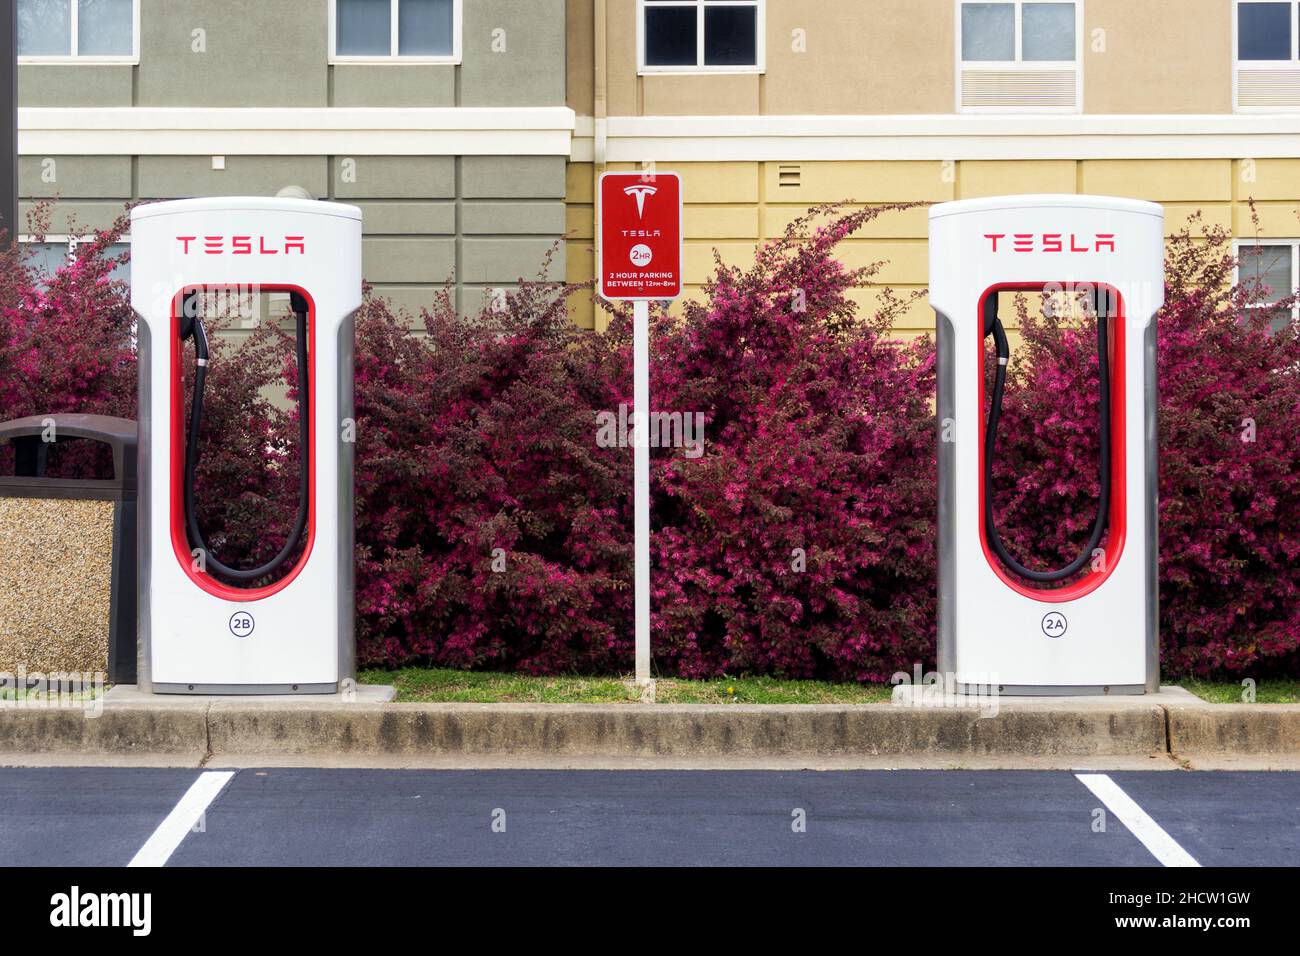 Tesla supercharger stations in a parking area Stock Photo